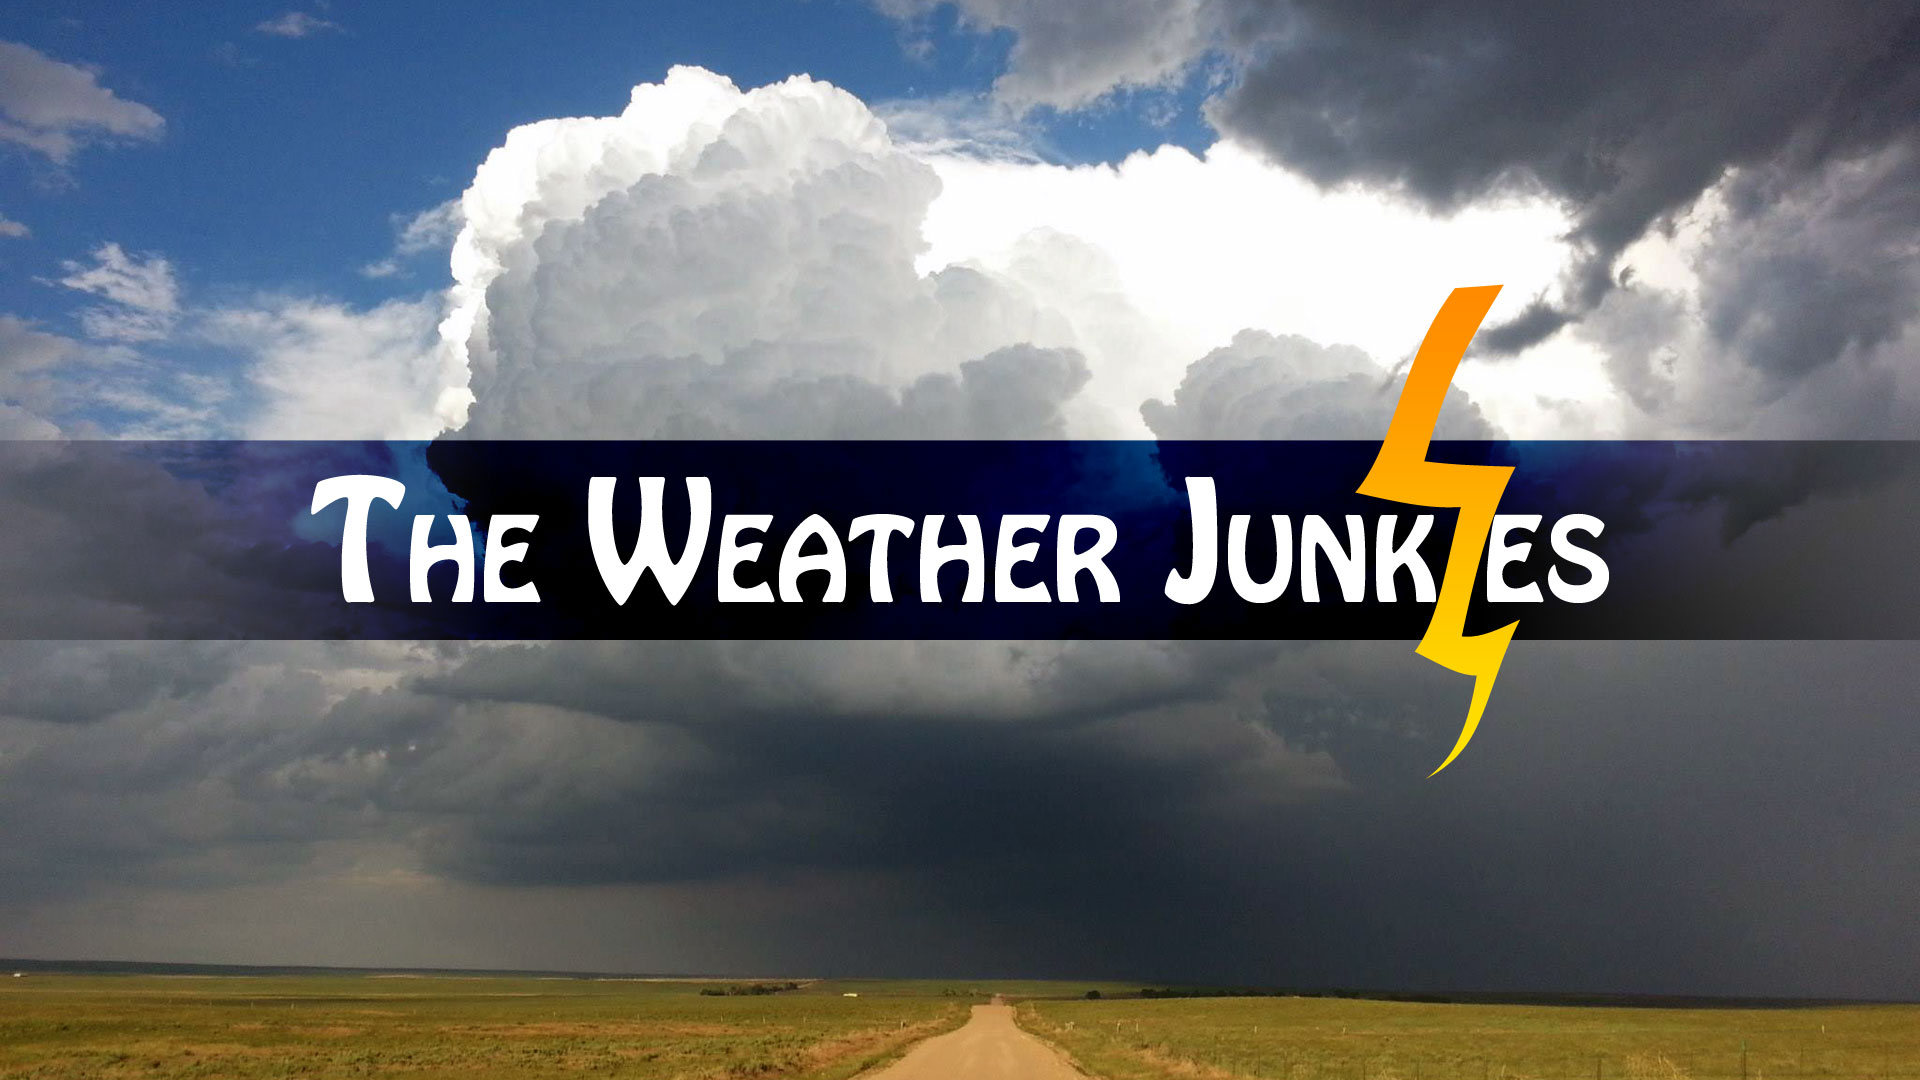 Ethics of storm chasing, a discussion with ‘The Weather Junkies’